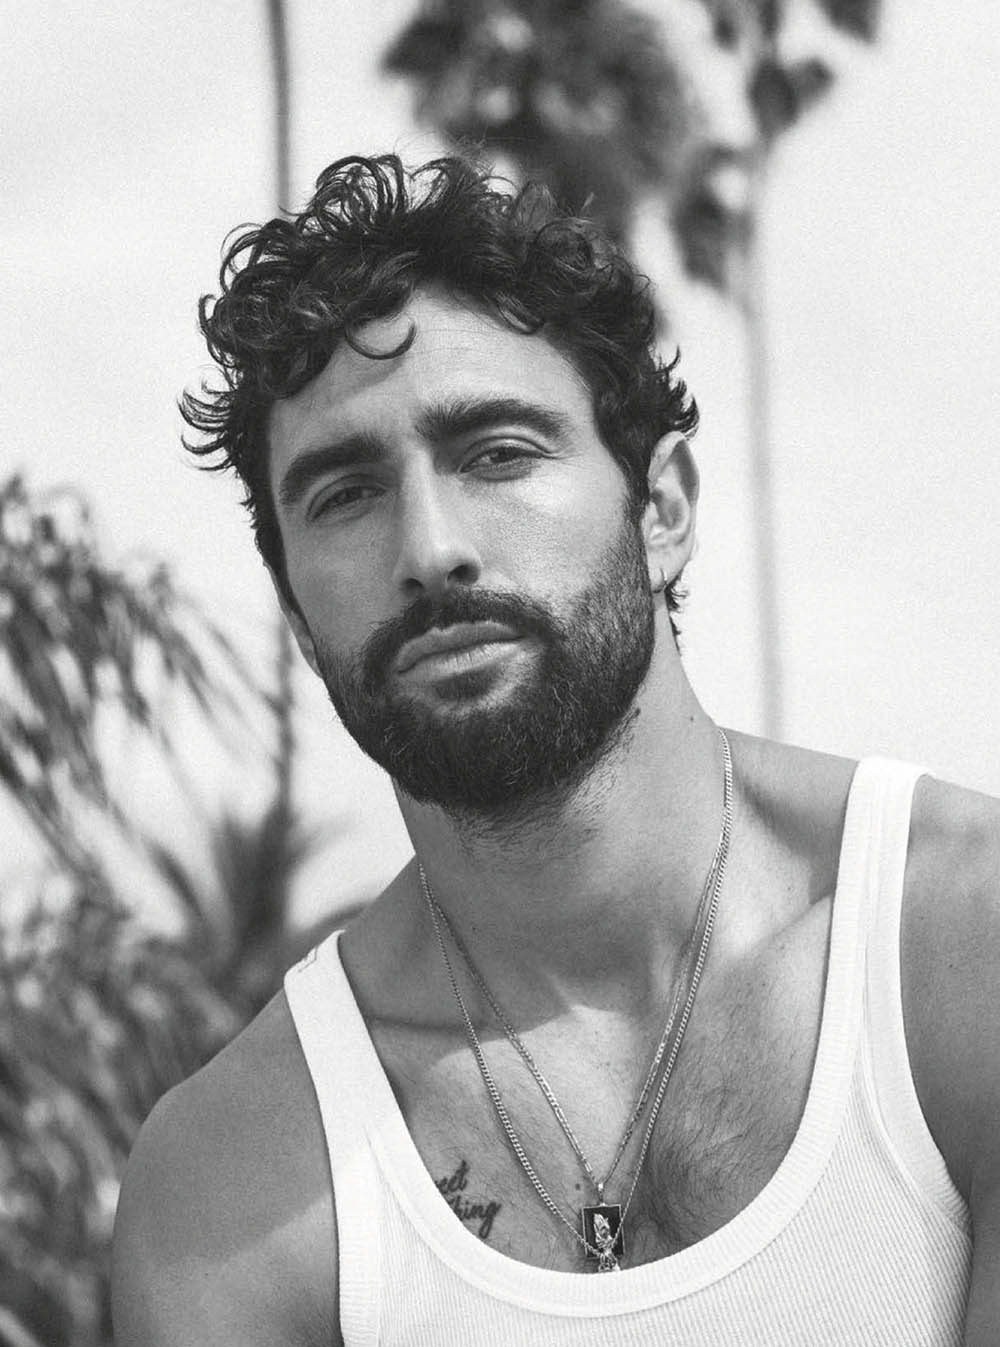 Noah Mills covers GQ Style Mexico & Latin America Spring Summer 2020 by Richard Ramos